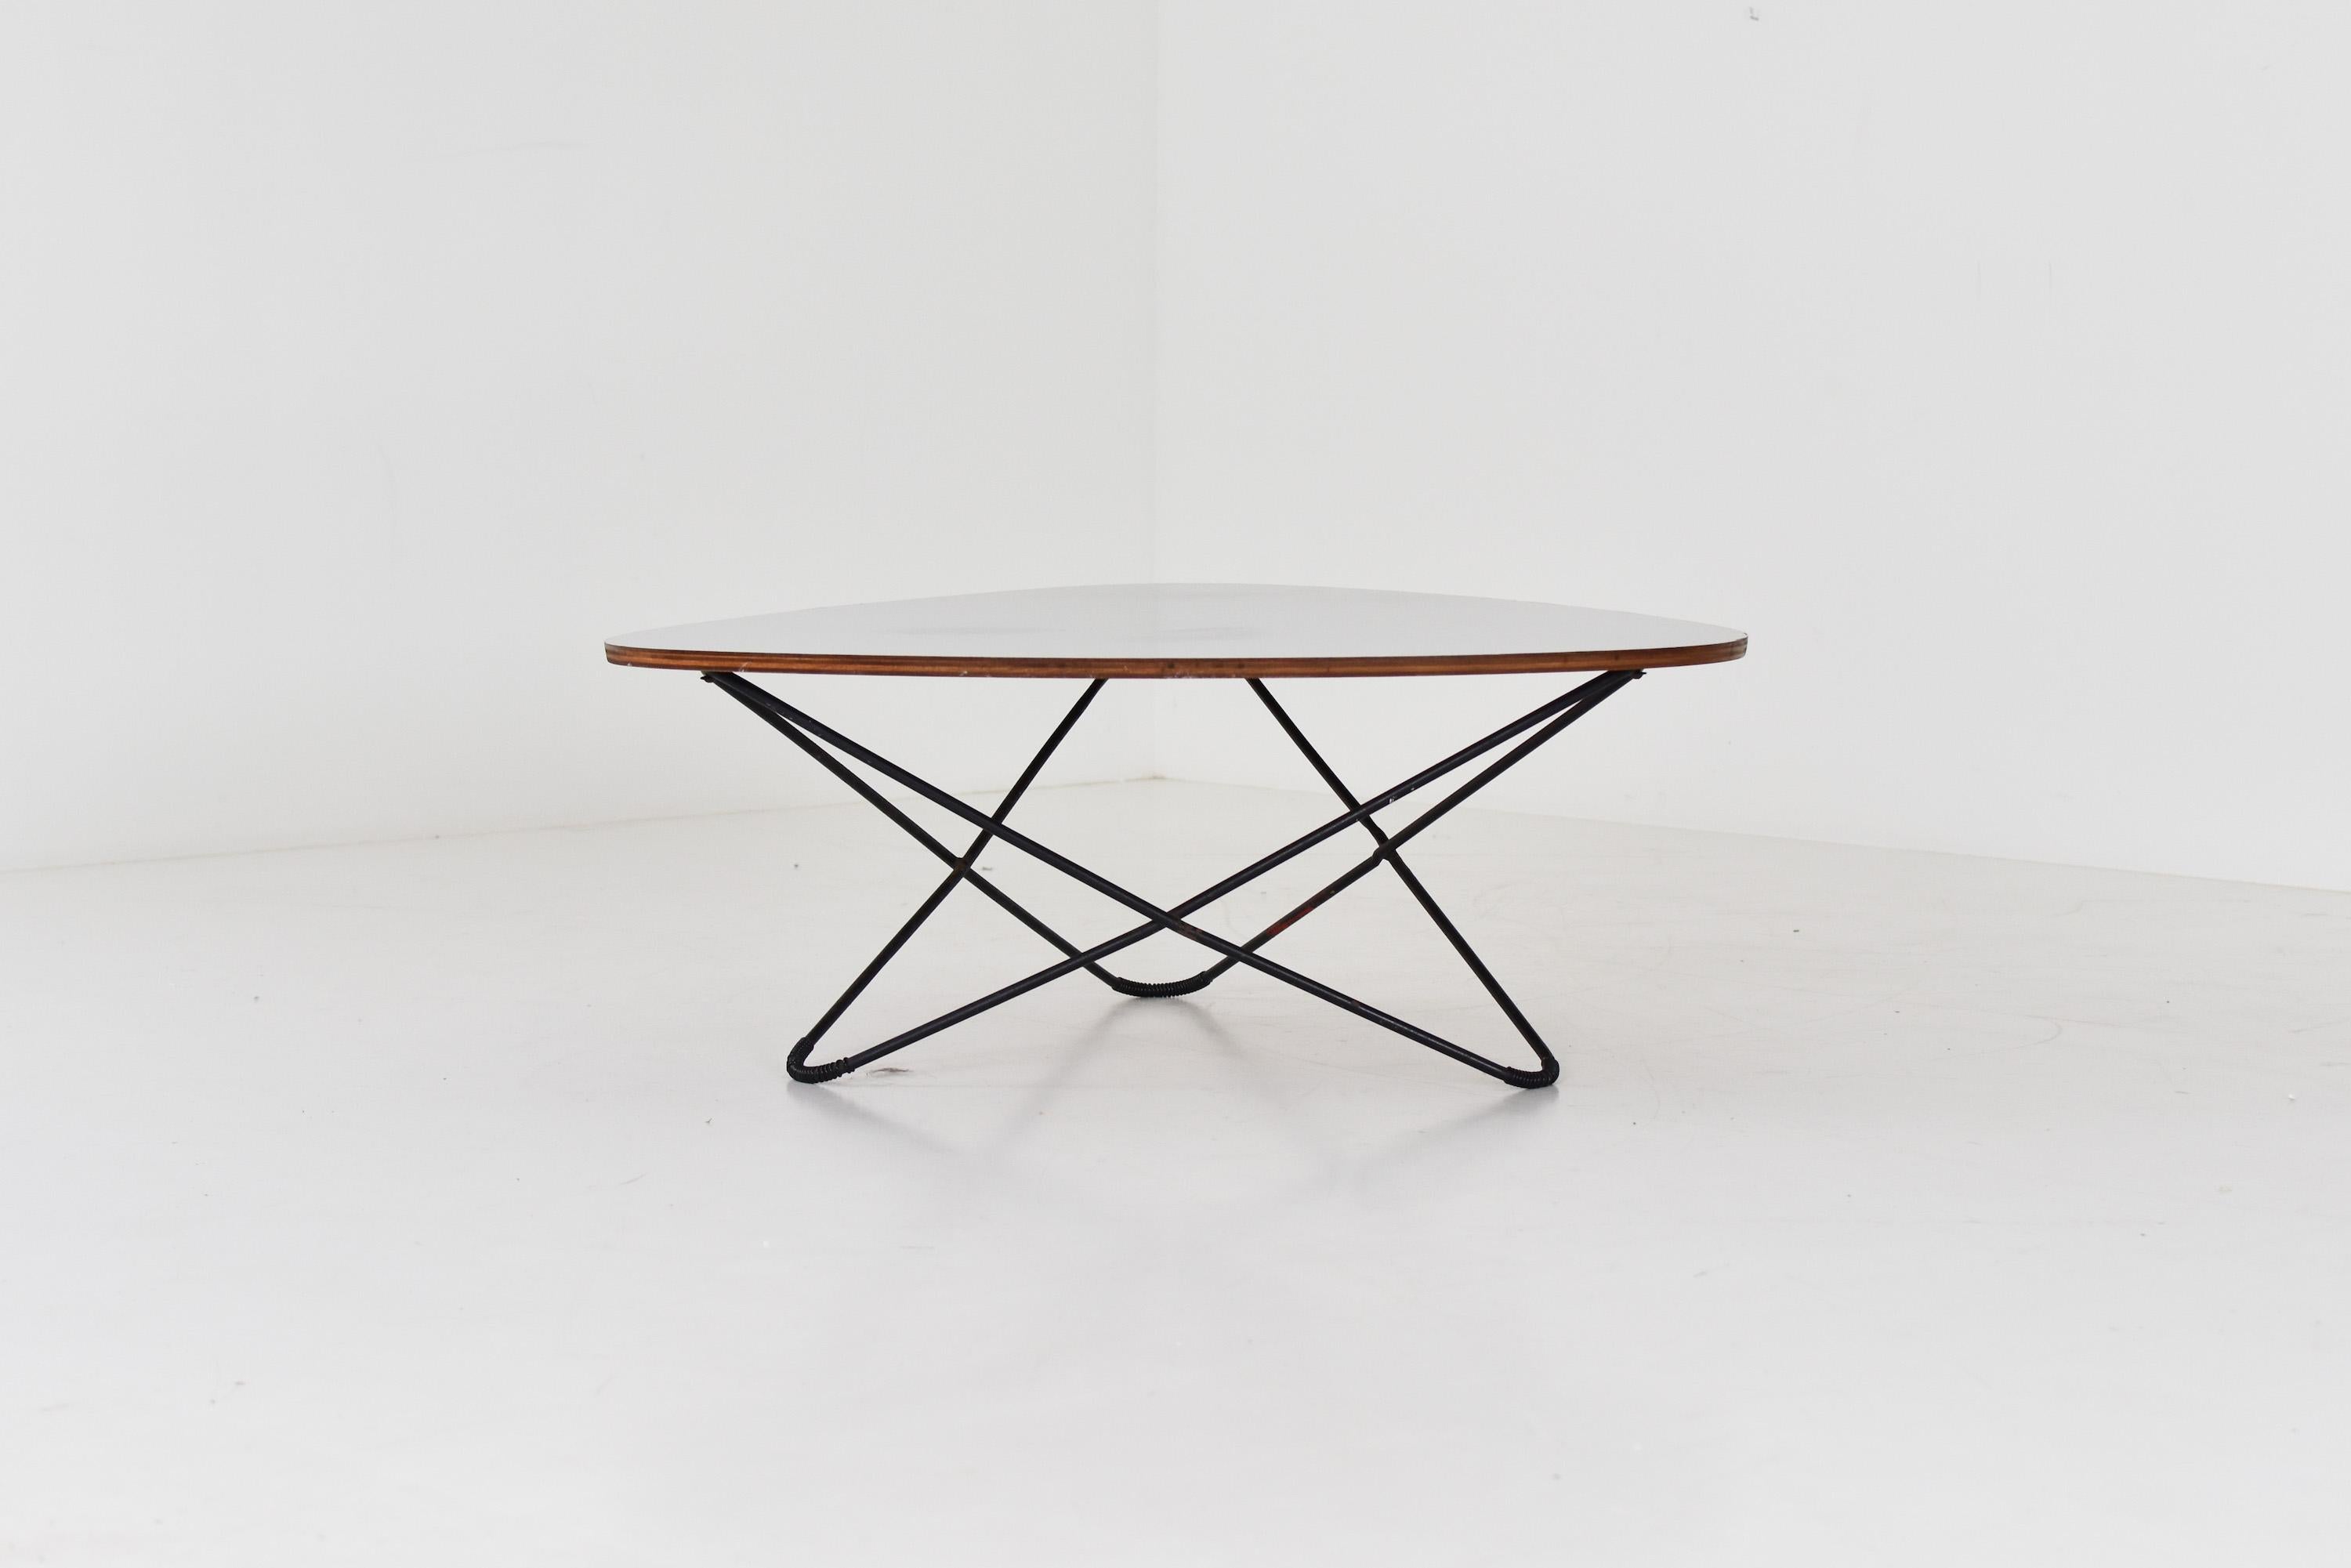 Diamond shaped coffee table by Florent Lasbleiz manufactured by Airborne France in 1954. This table has a grey laminated top, resting on a black lacquered steel base. Small veneer damage, as seen on the pictures, but overall in a very beautiful and